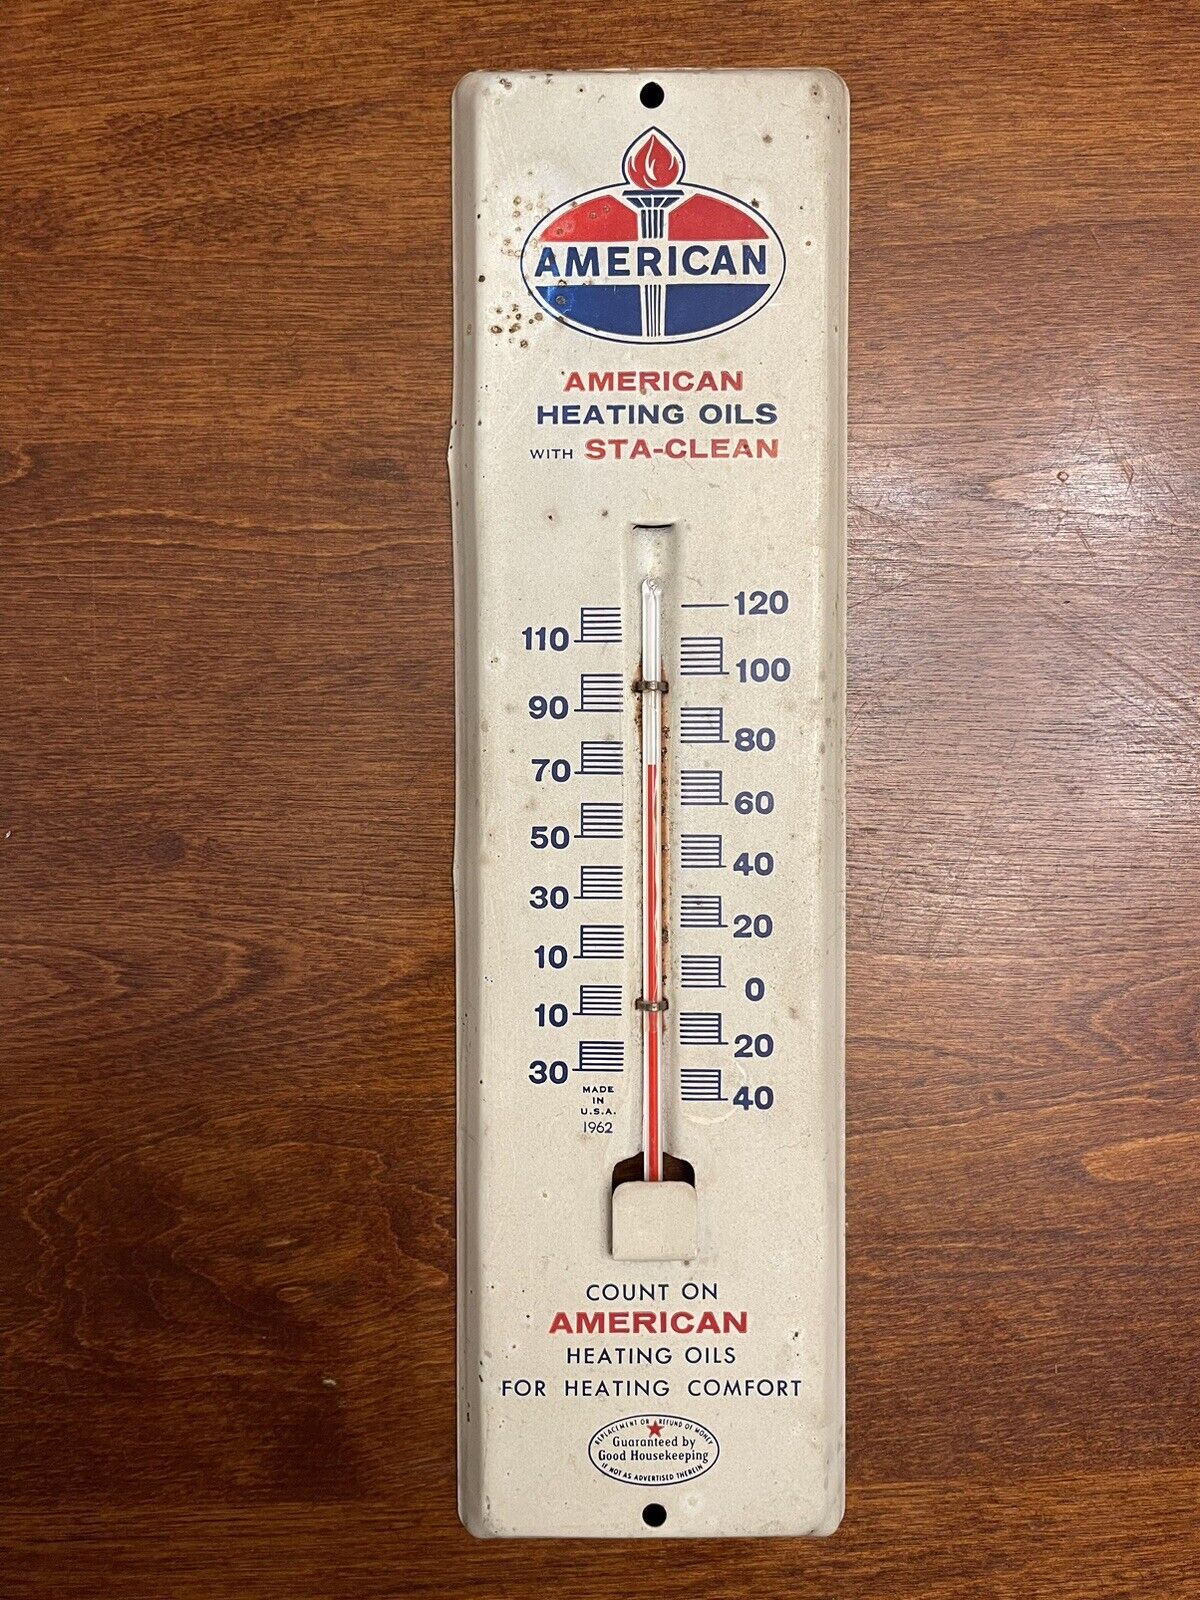 Vintage Metal Thermometer From Standard Sta-Clean Heating Oils